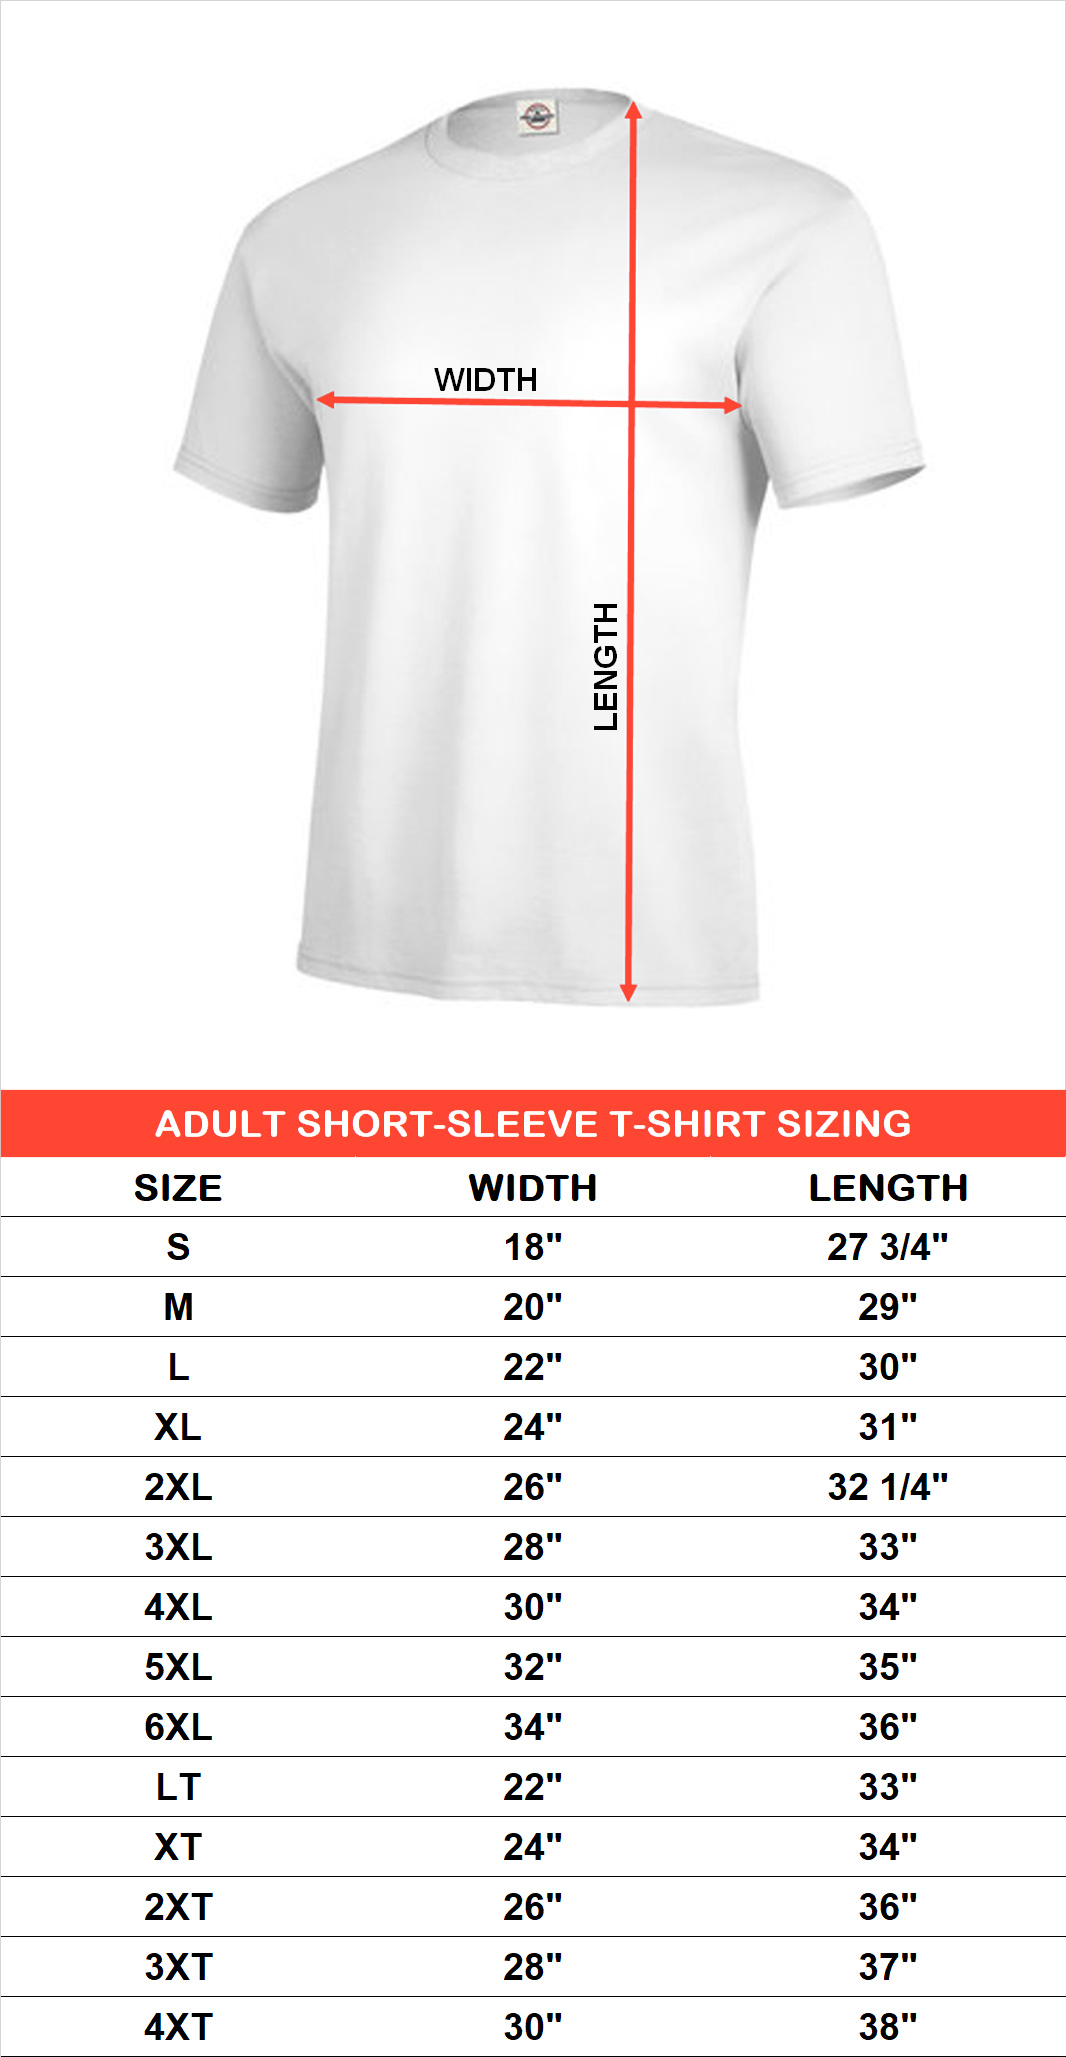 Sizing chart for the Silence of the Lambs Body Lotion t-shirt SOL514